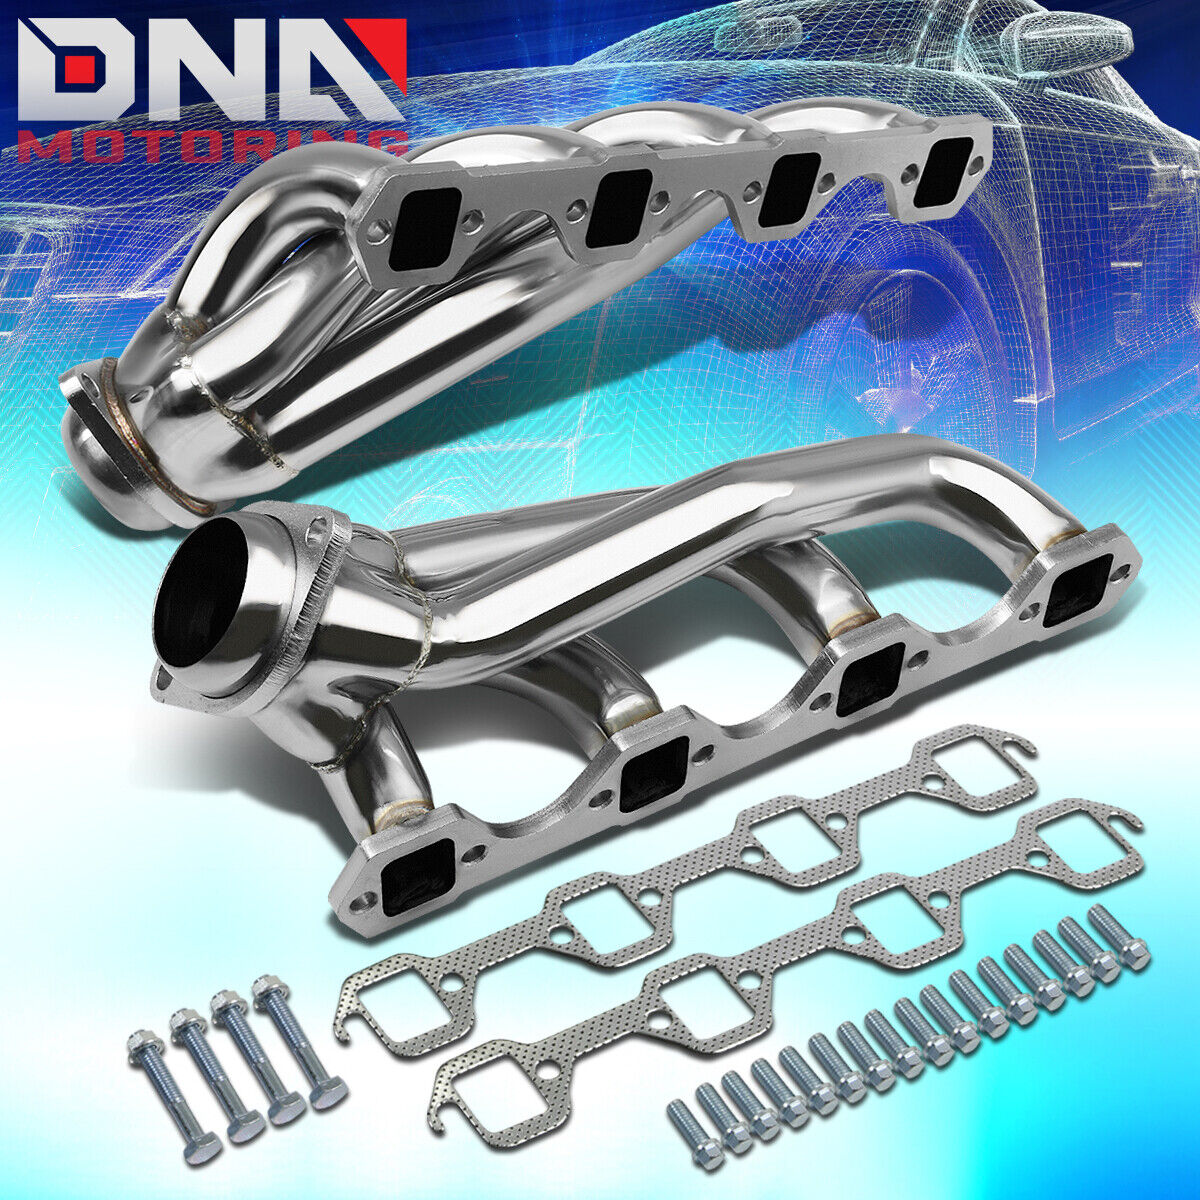 STAINLESS STEEL HEADER FOR 79-93 MUSTANG WINDSOR 5.0 V8 8CYL EXHAUST/MANIFOLD